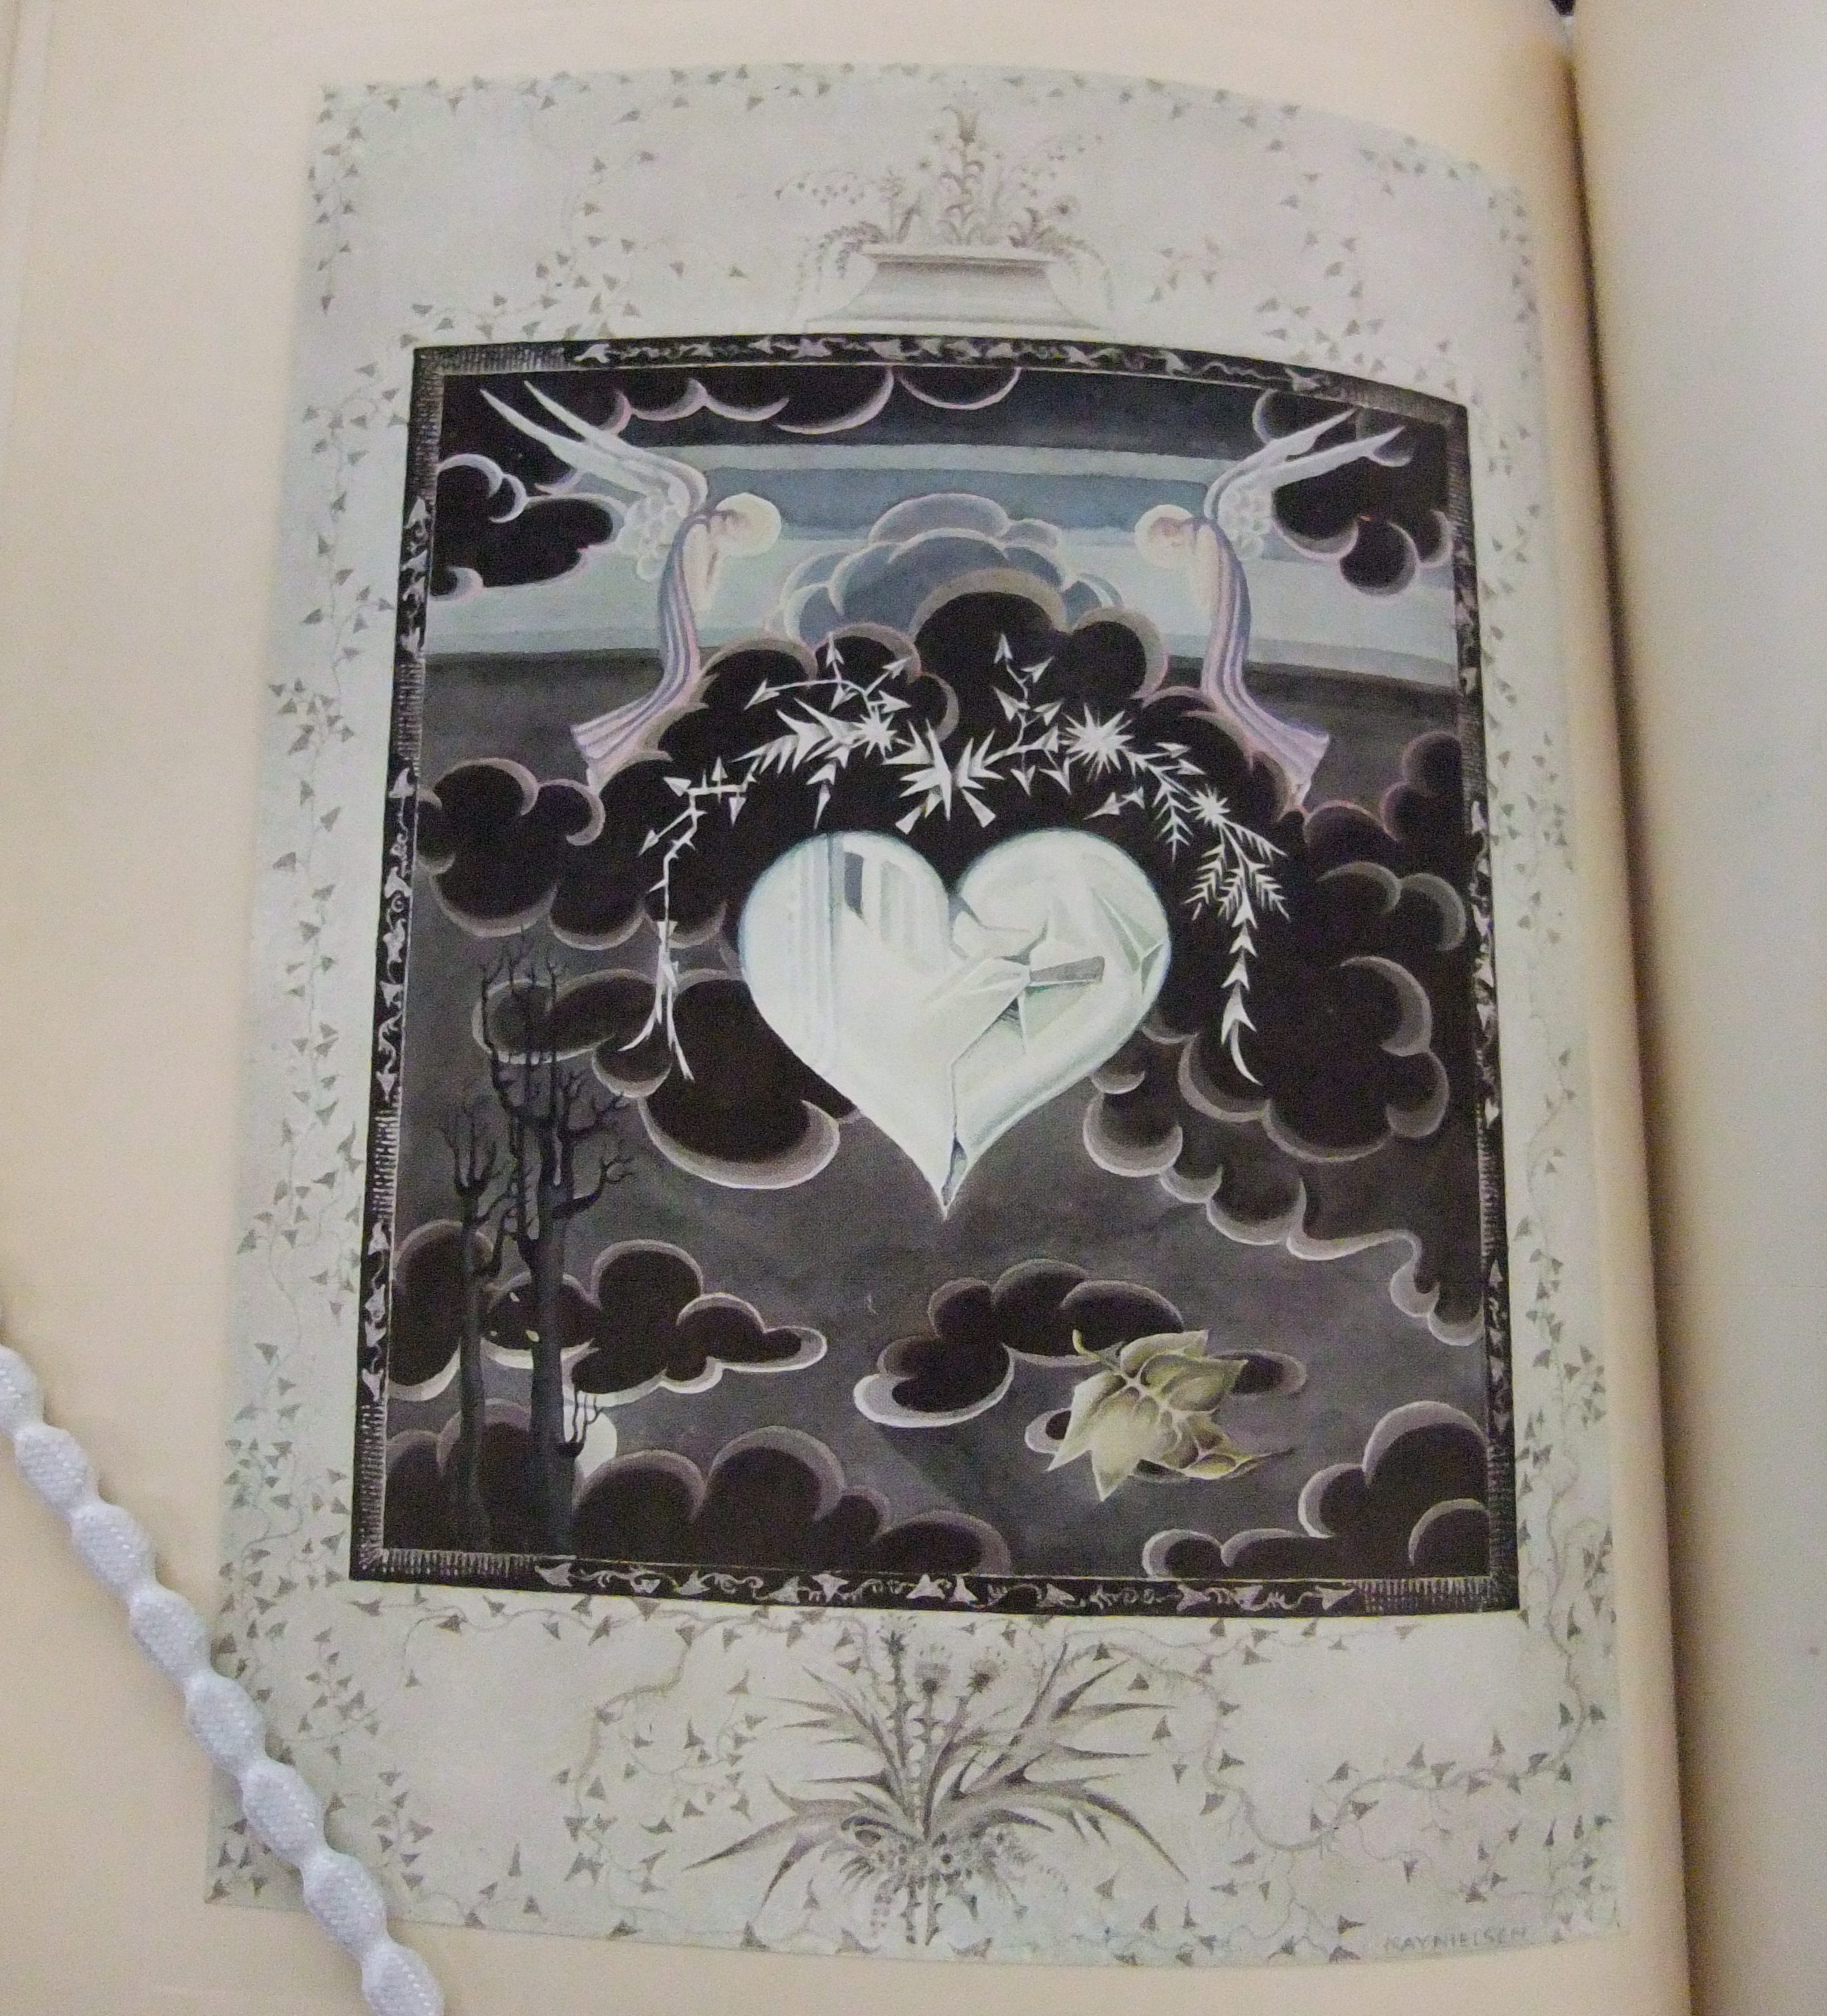 open book showing illustration of Snow Queen